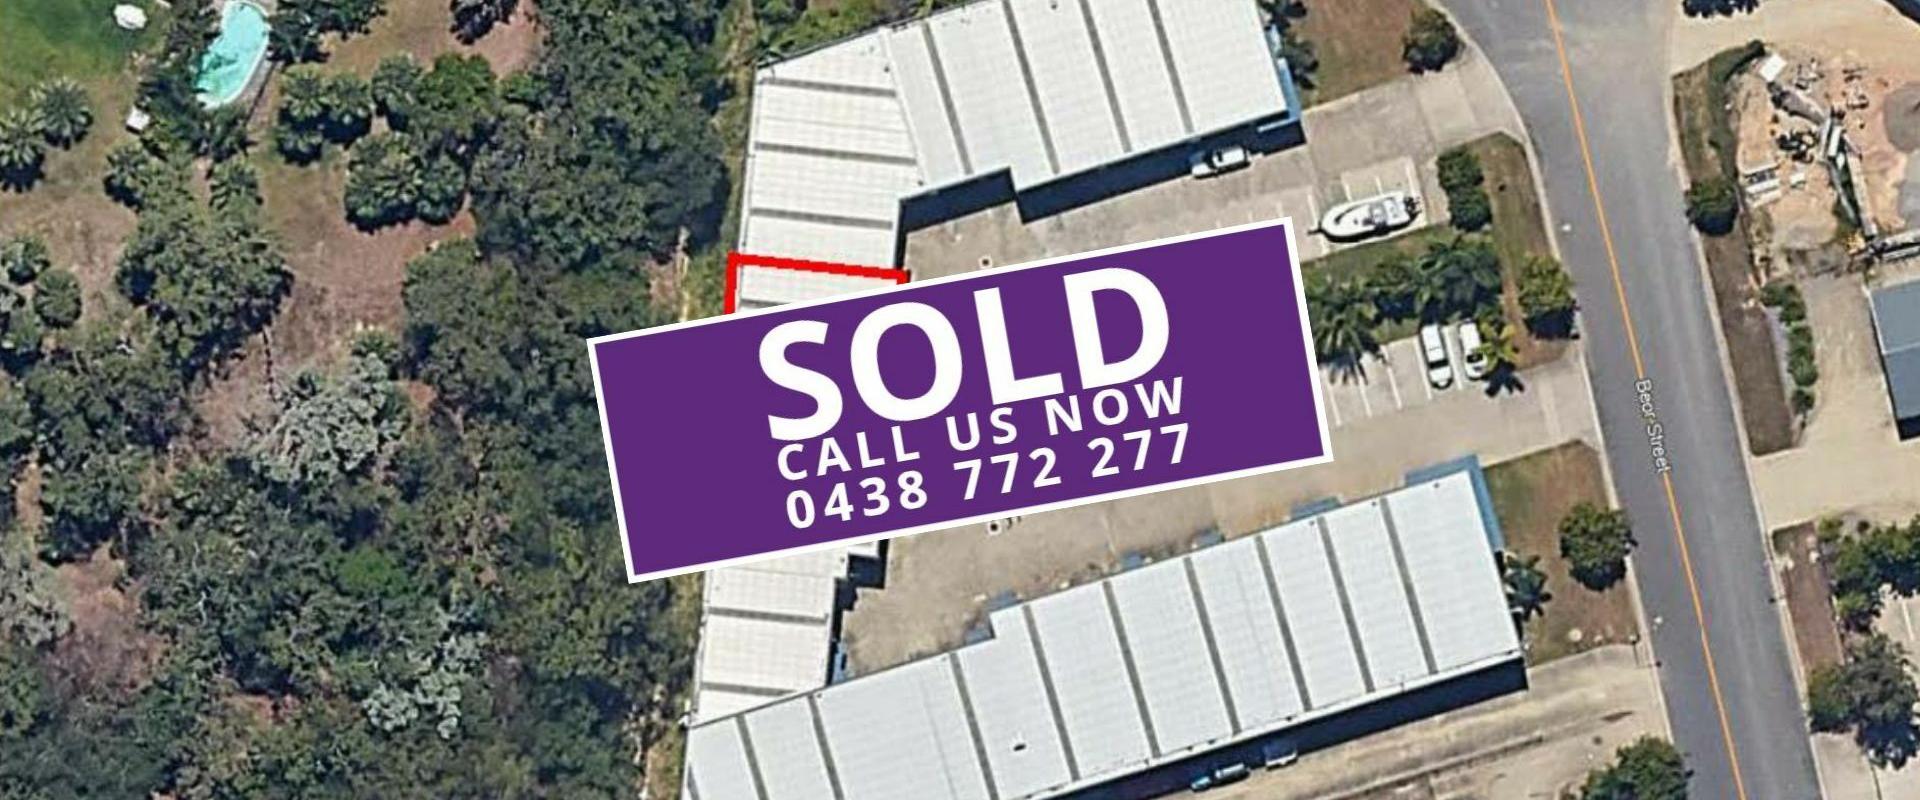 Industrial Shed SOLD by Tony McGrath Real Estate